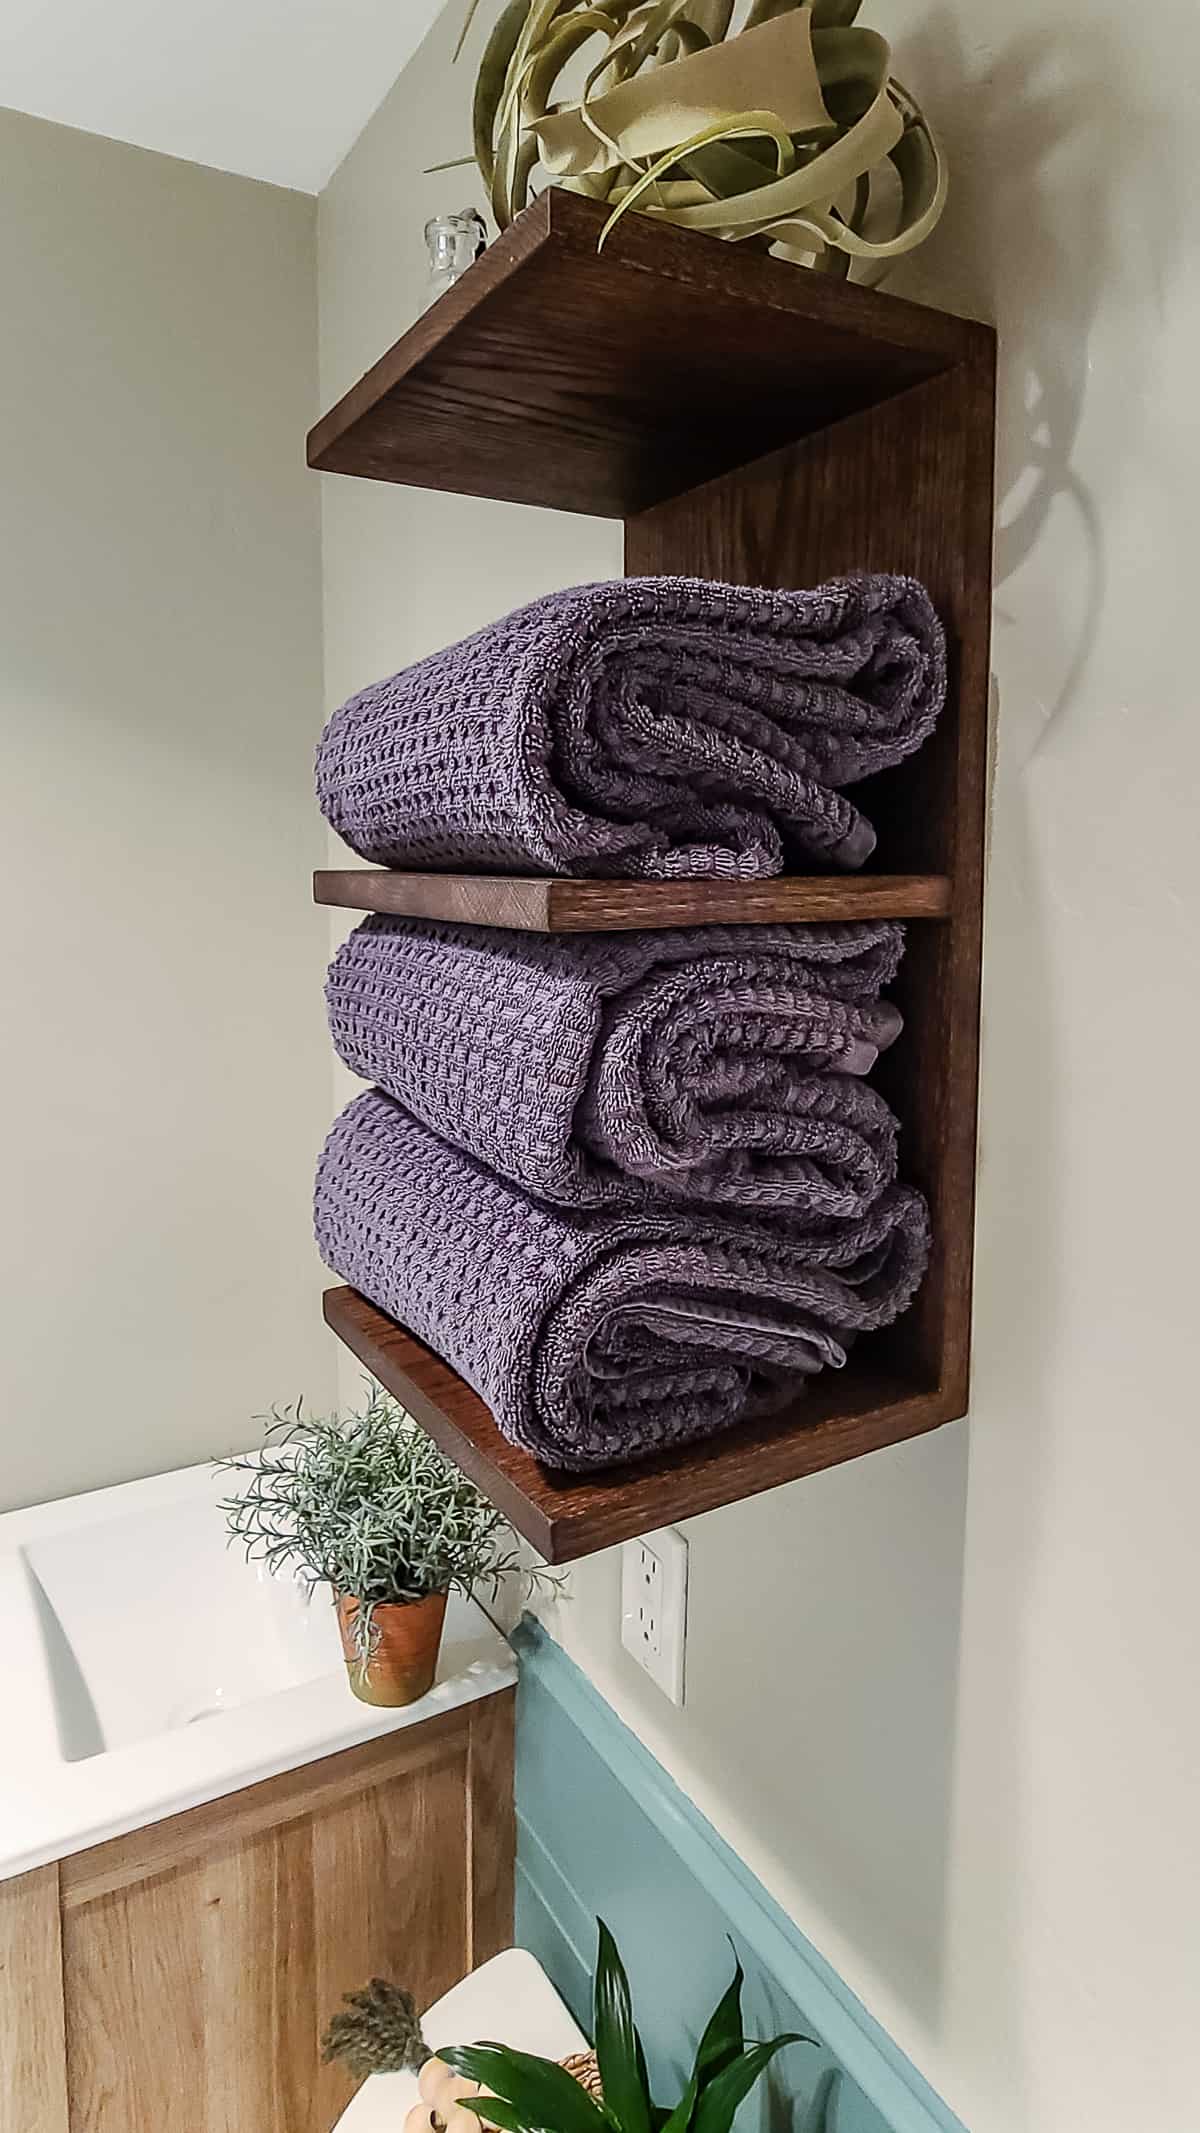 FREE PROJECT PLAN: How to Build DIY Bathroom Storage Shelves  Bathroom  shelves for towels, Diy bathroom storage, Bathroom storage shelves